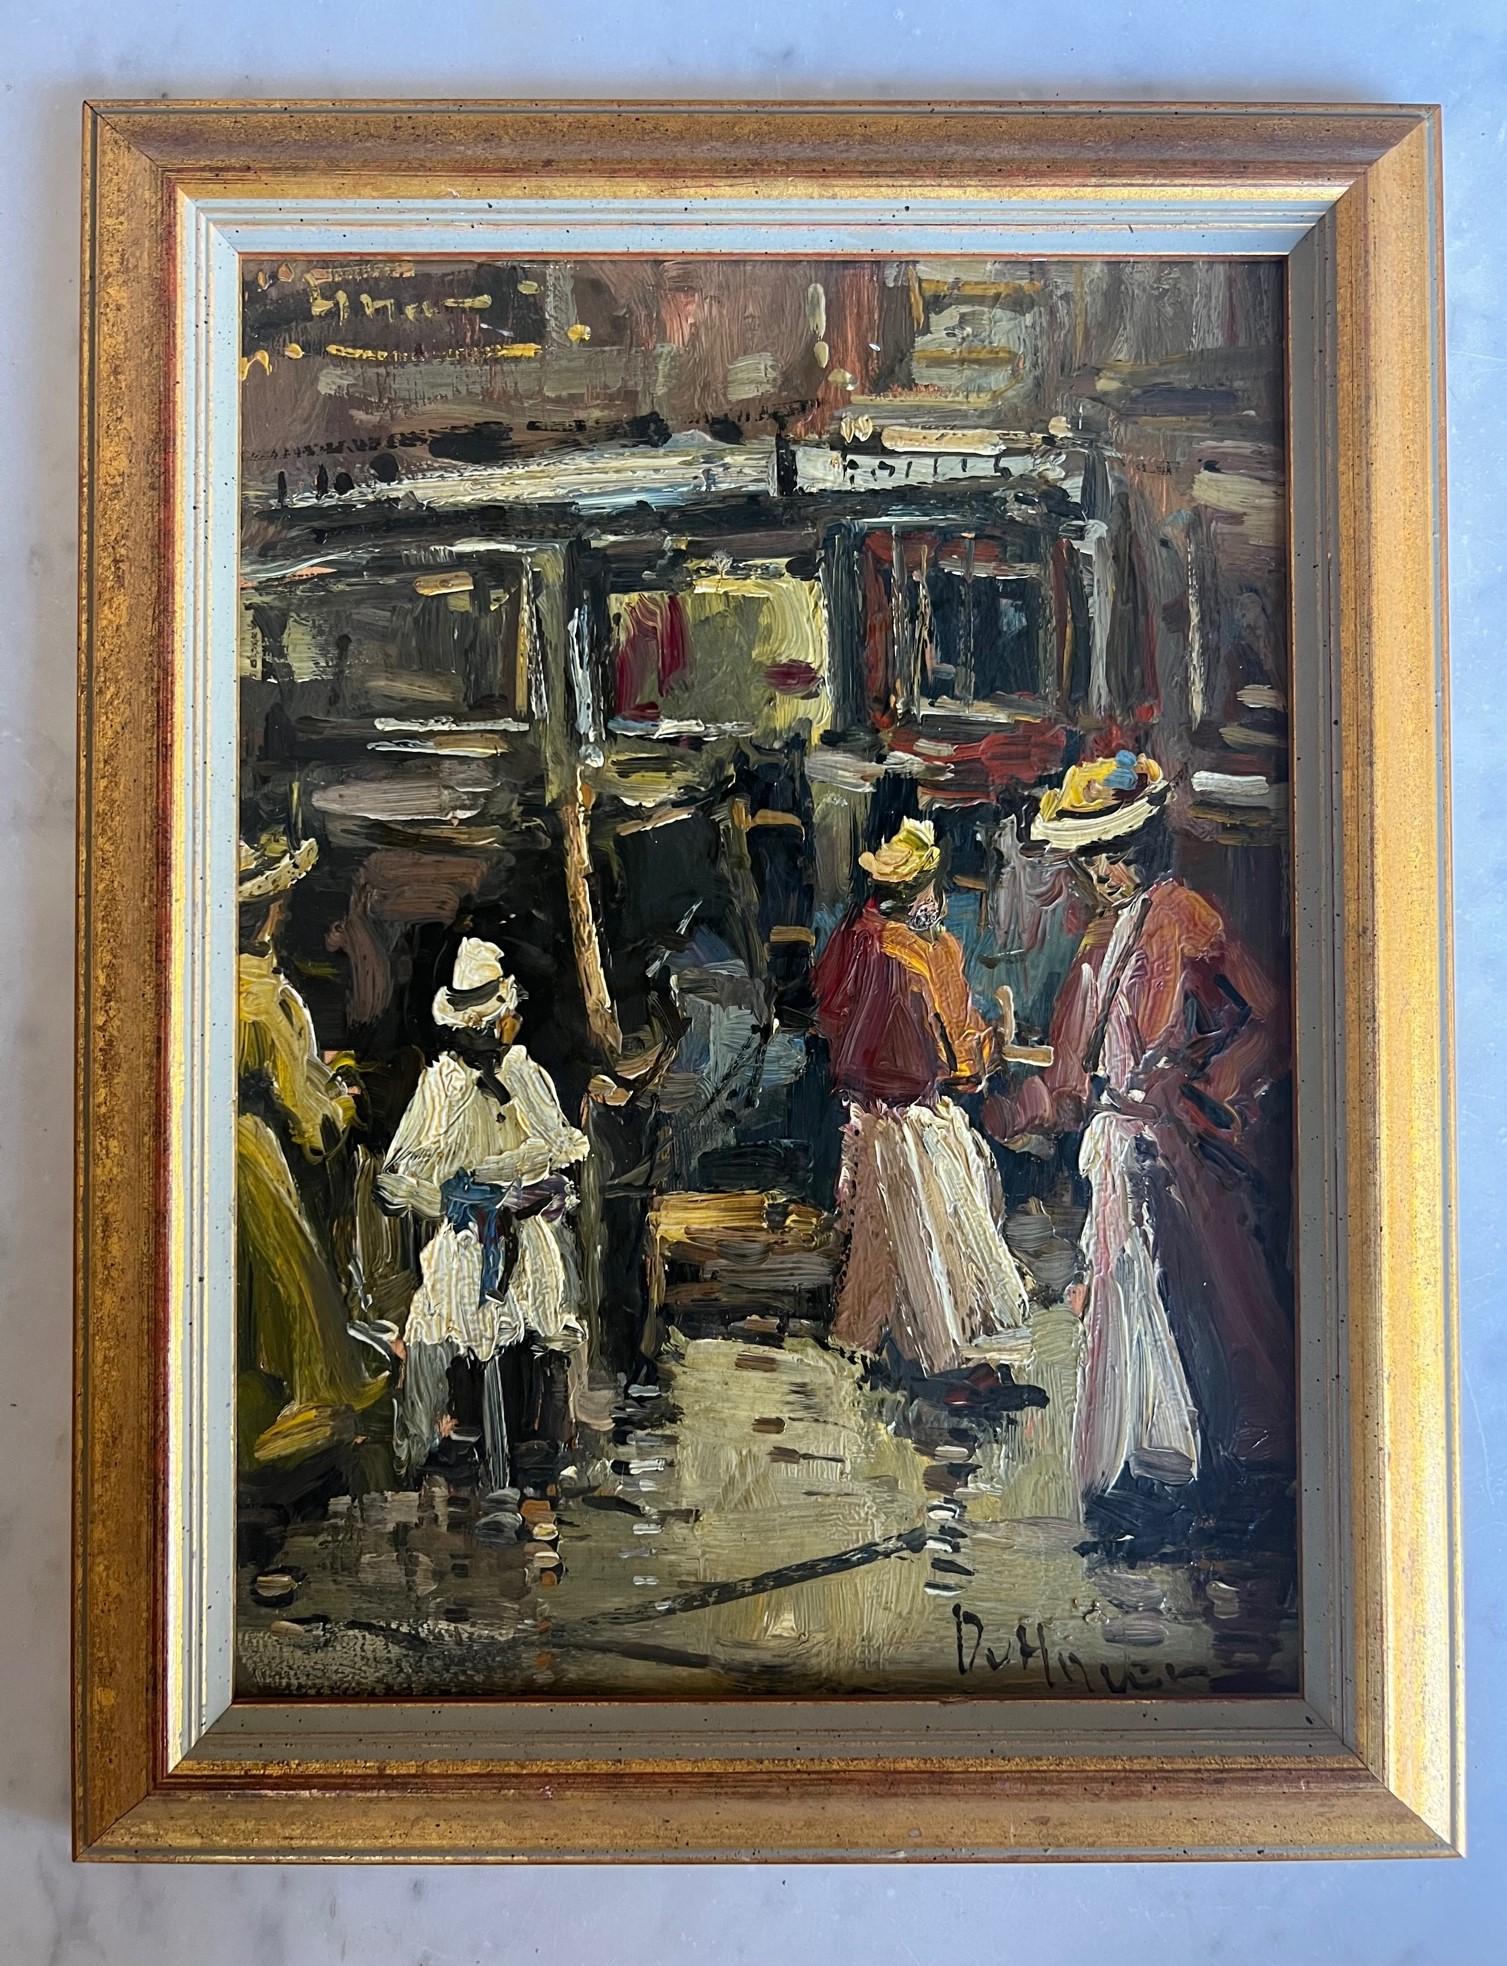 Vintage abstract oil painting on wood signed by the artist.

Painting dimensions: 12